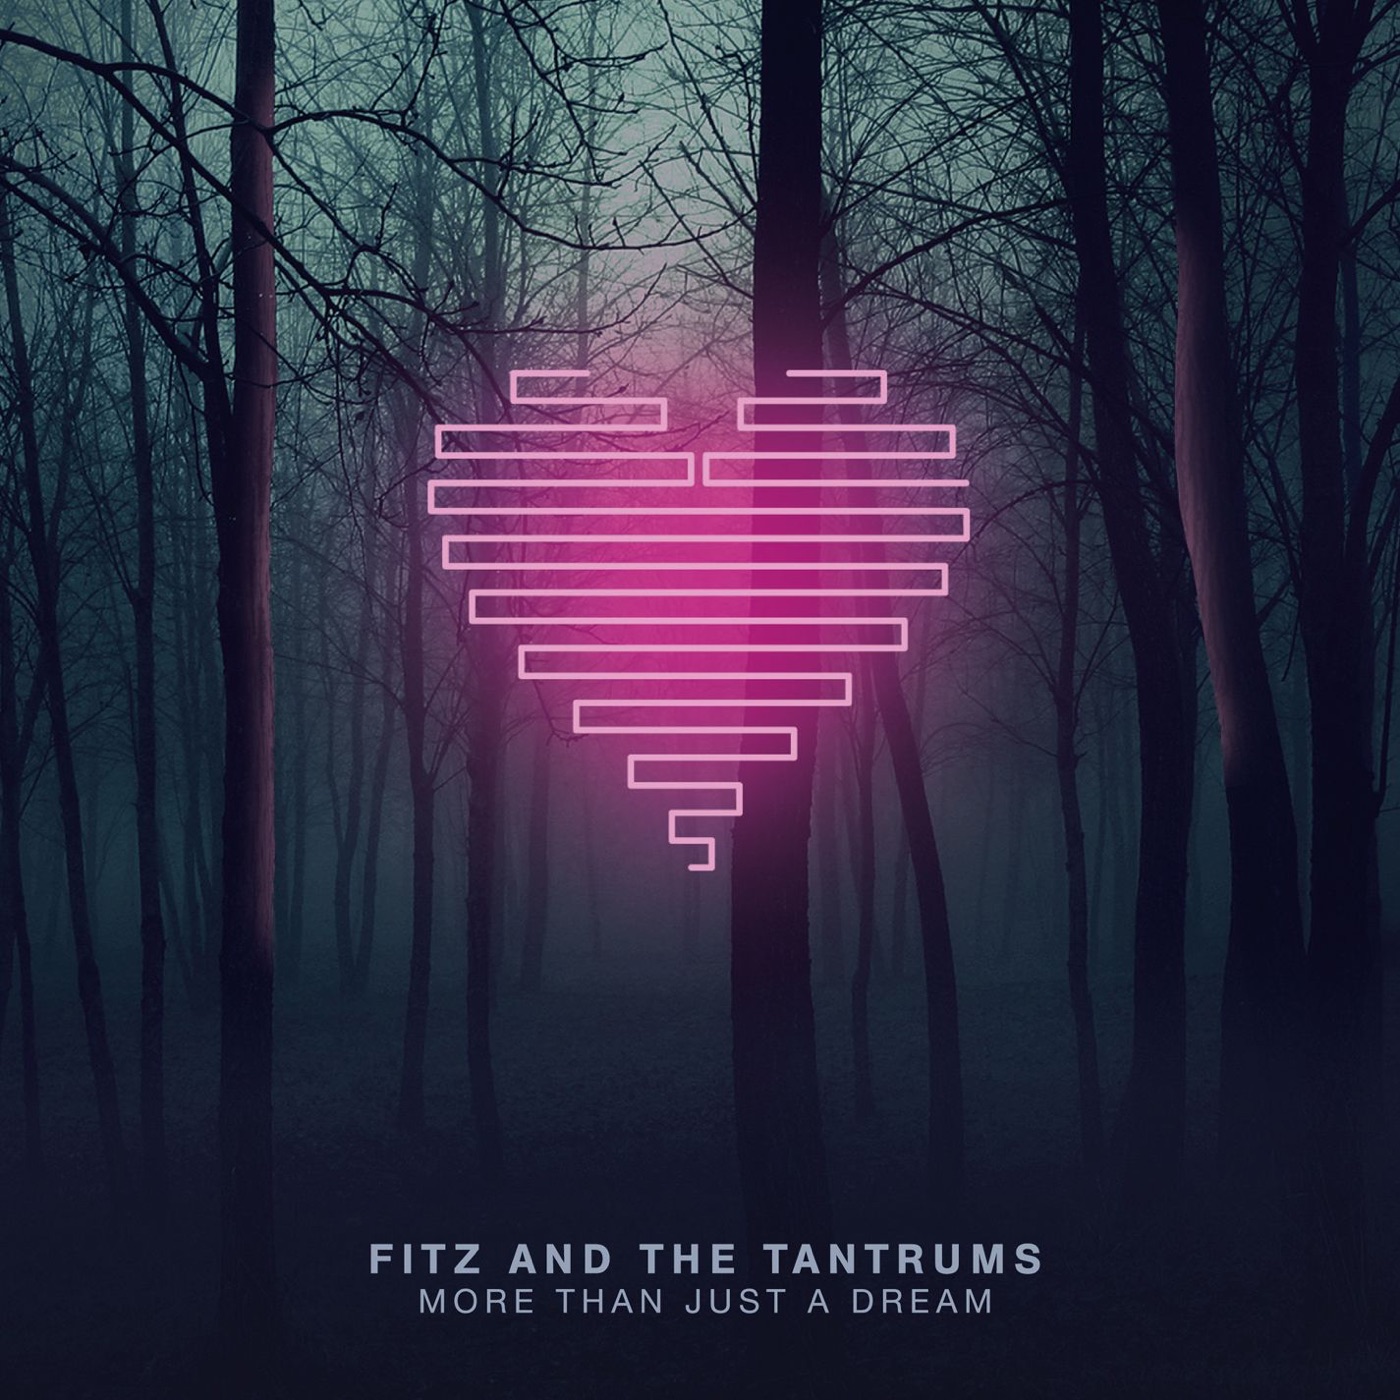 az_4497_More Than Just a Dream (Deluxe Version)_Fitz and The Tantrums